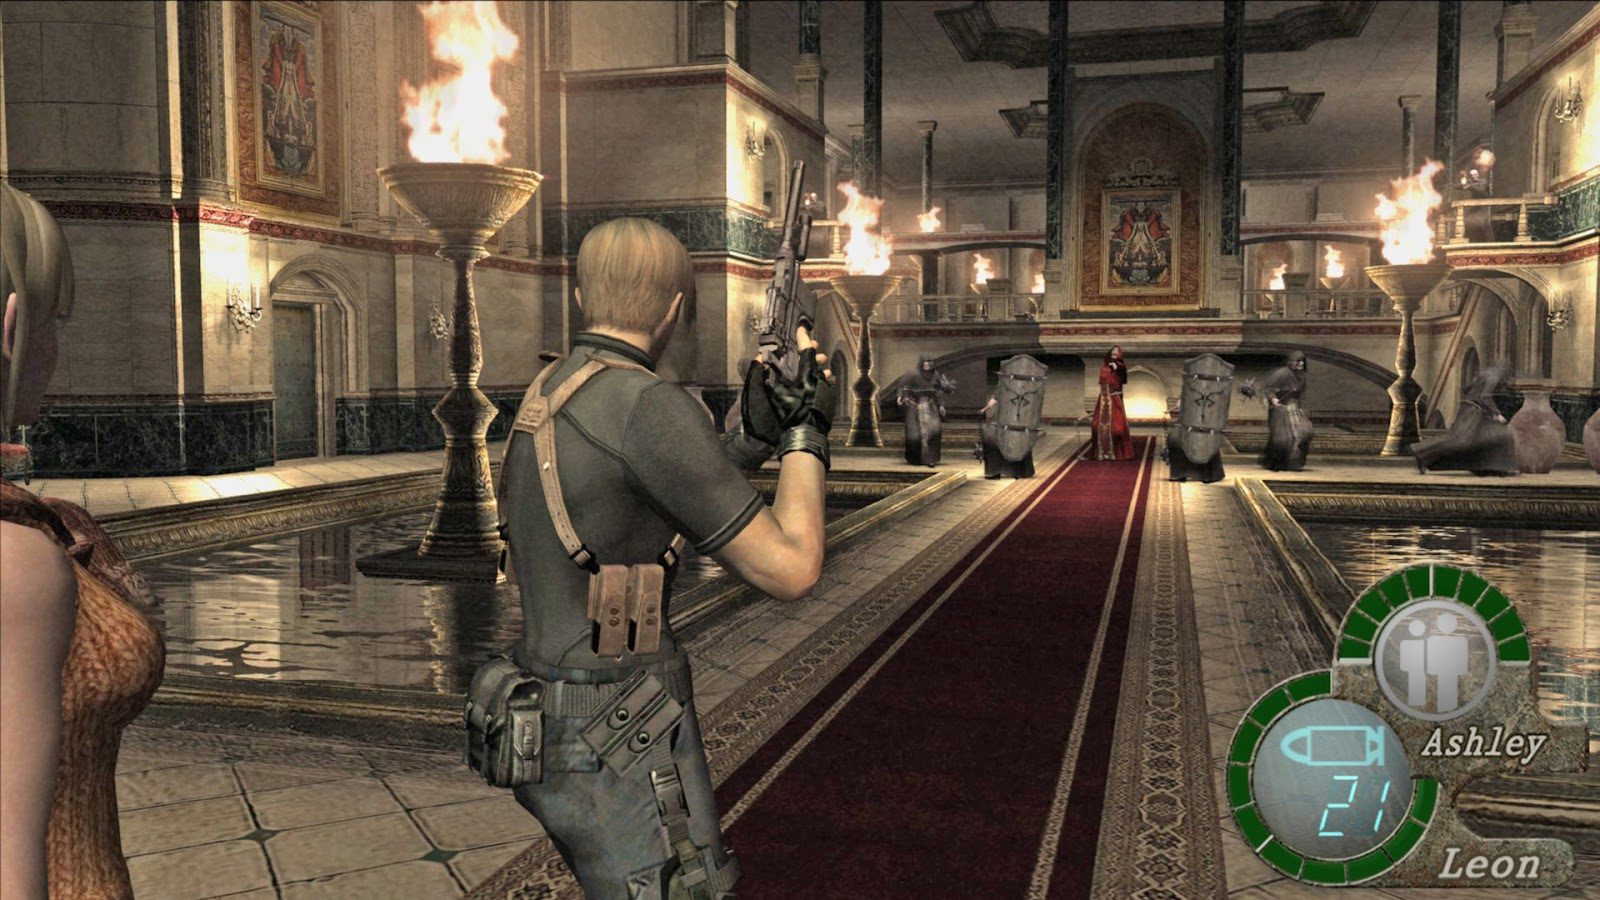 That one really hard castle room in Resident Evil 4.